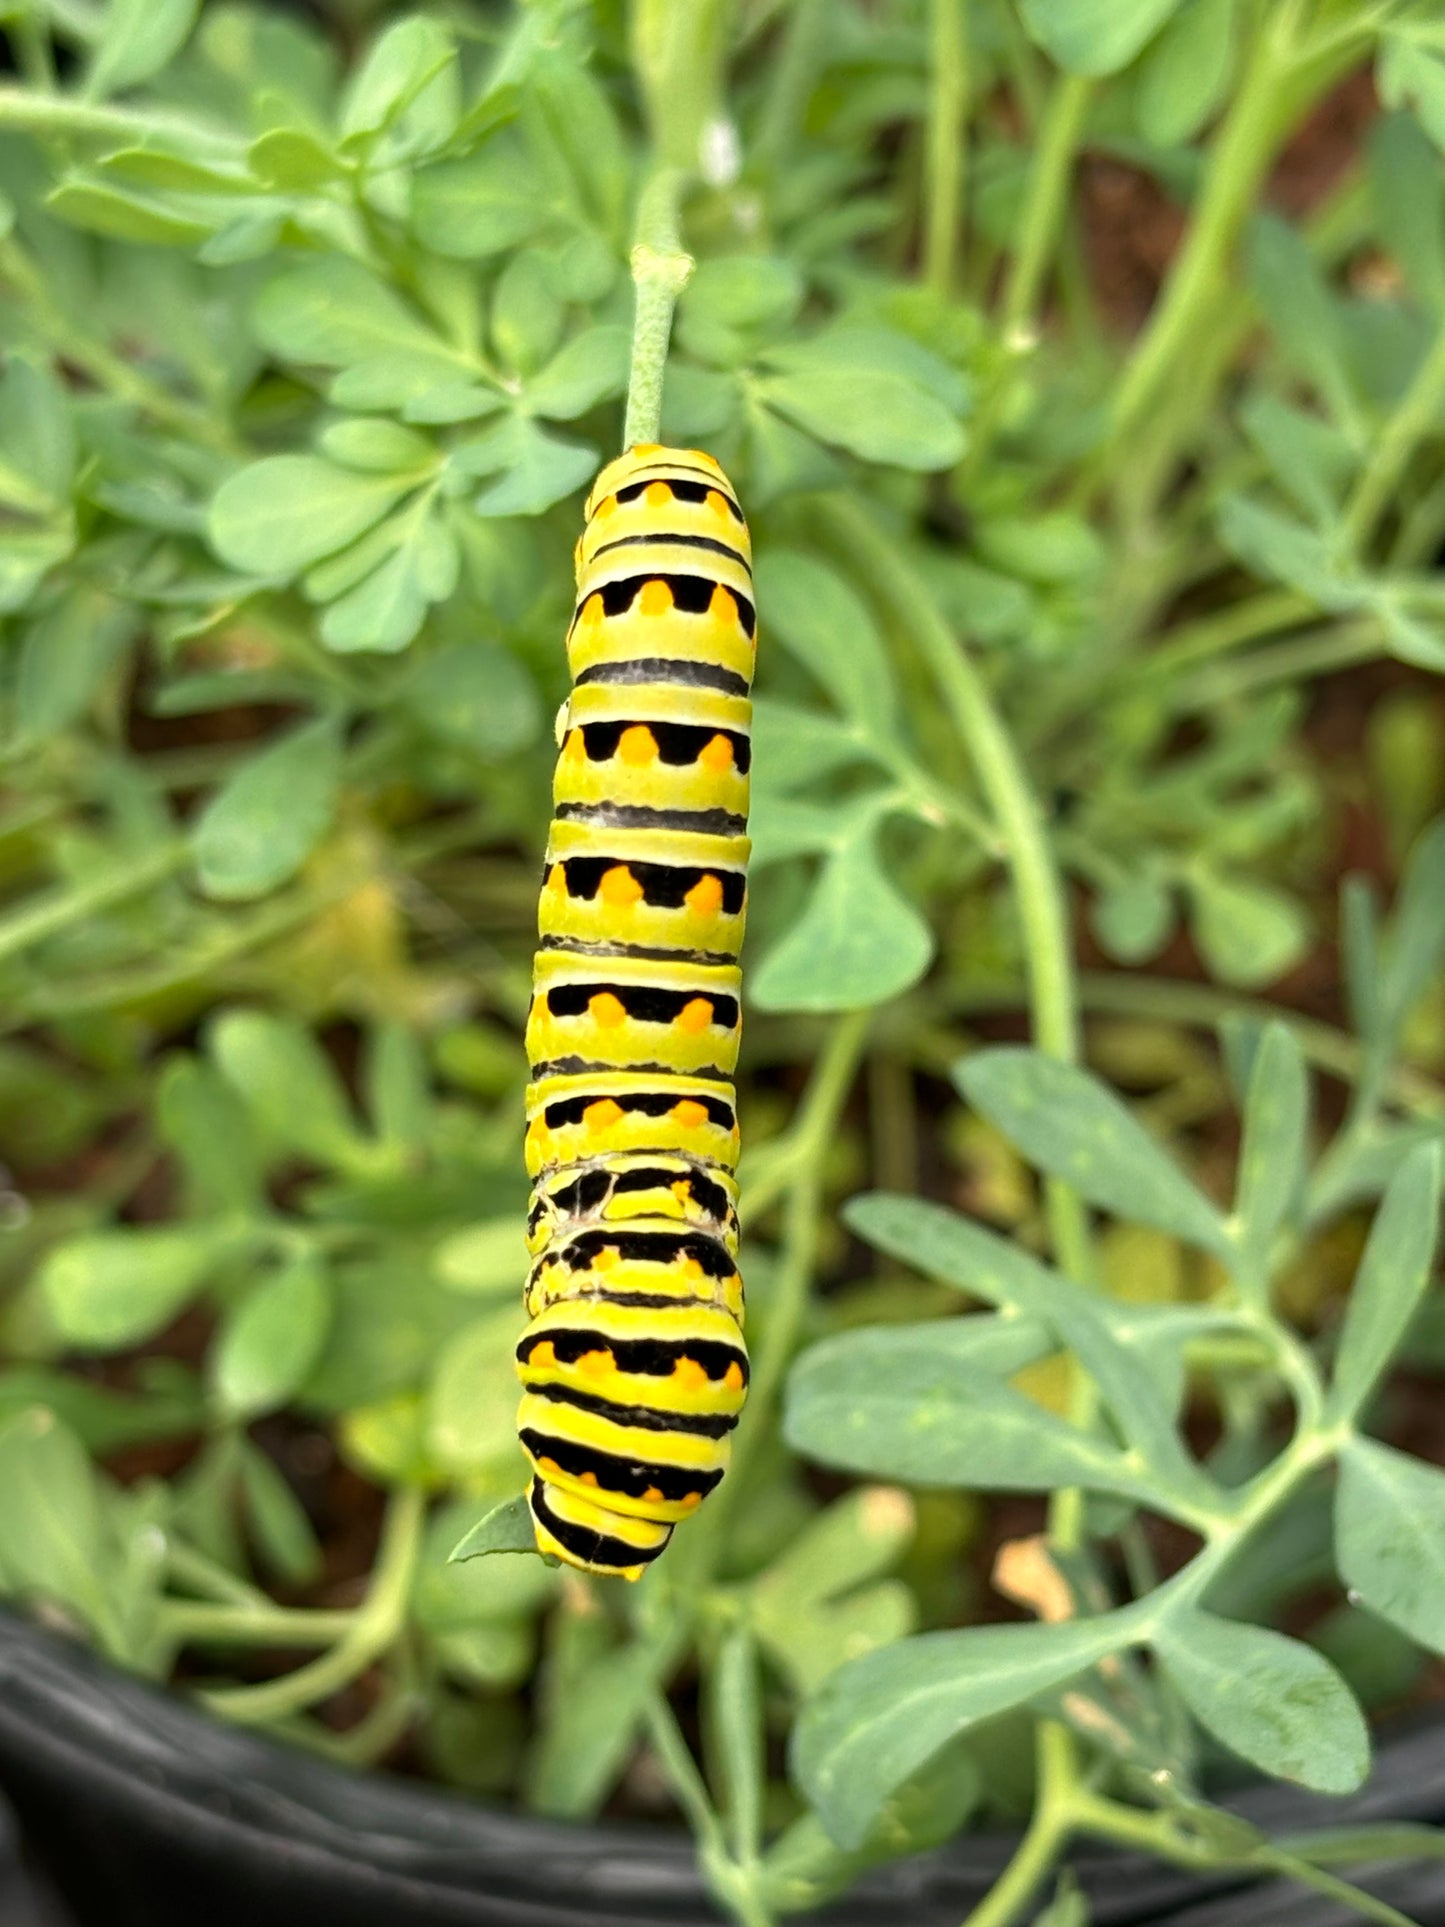 black swallowtail caterpillar uses rue as a host plant